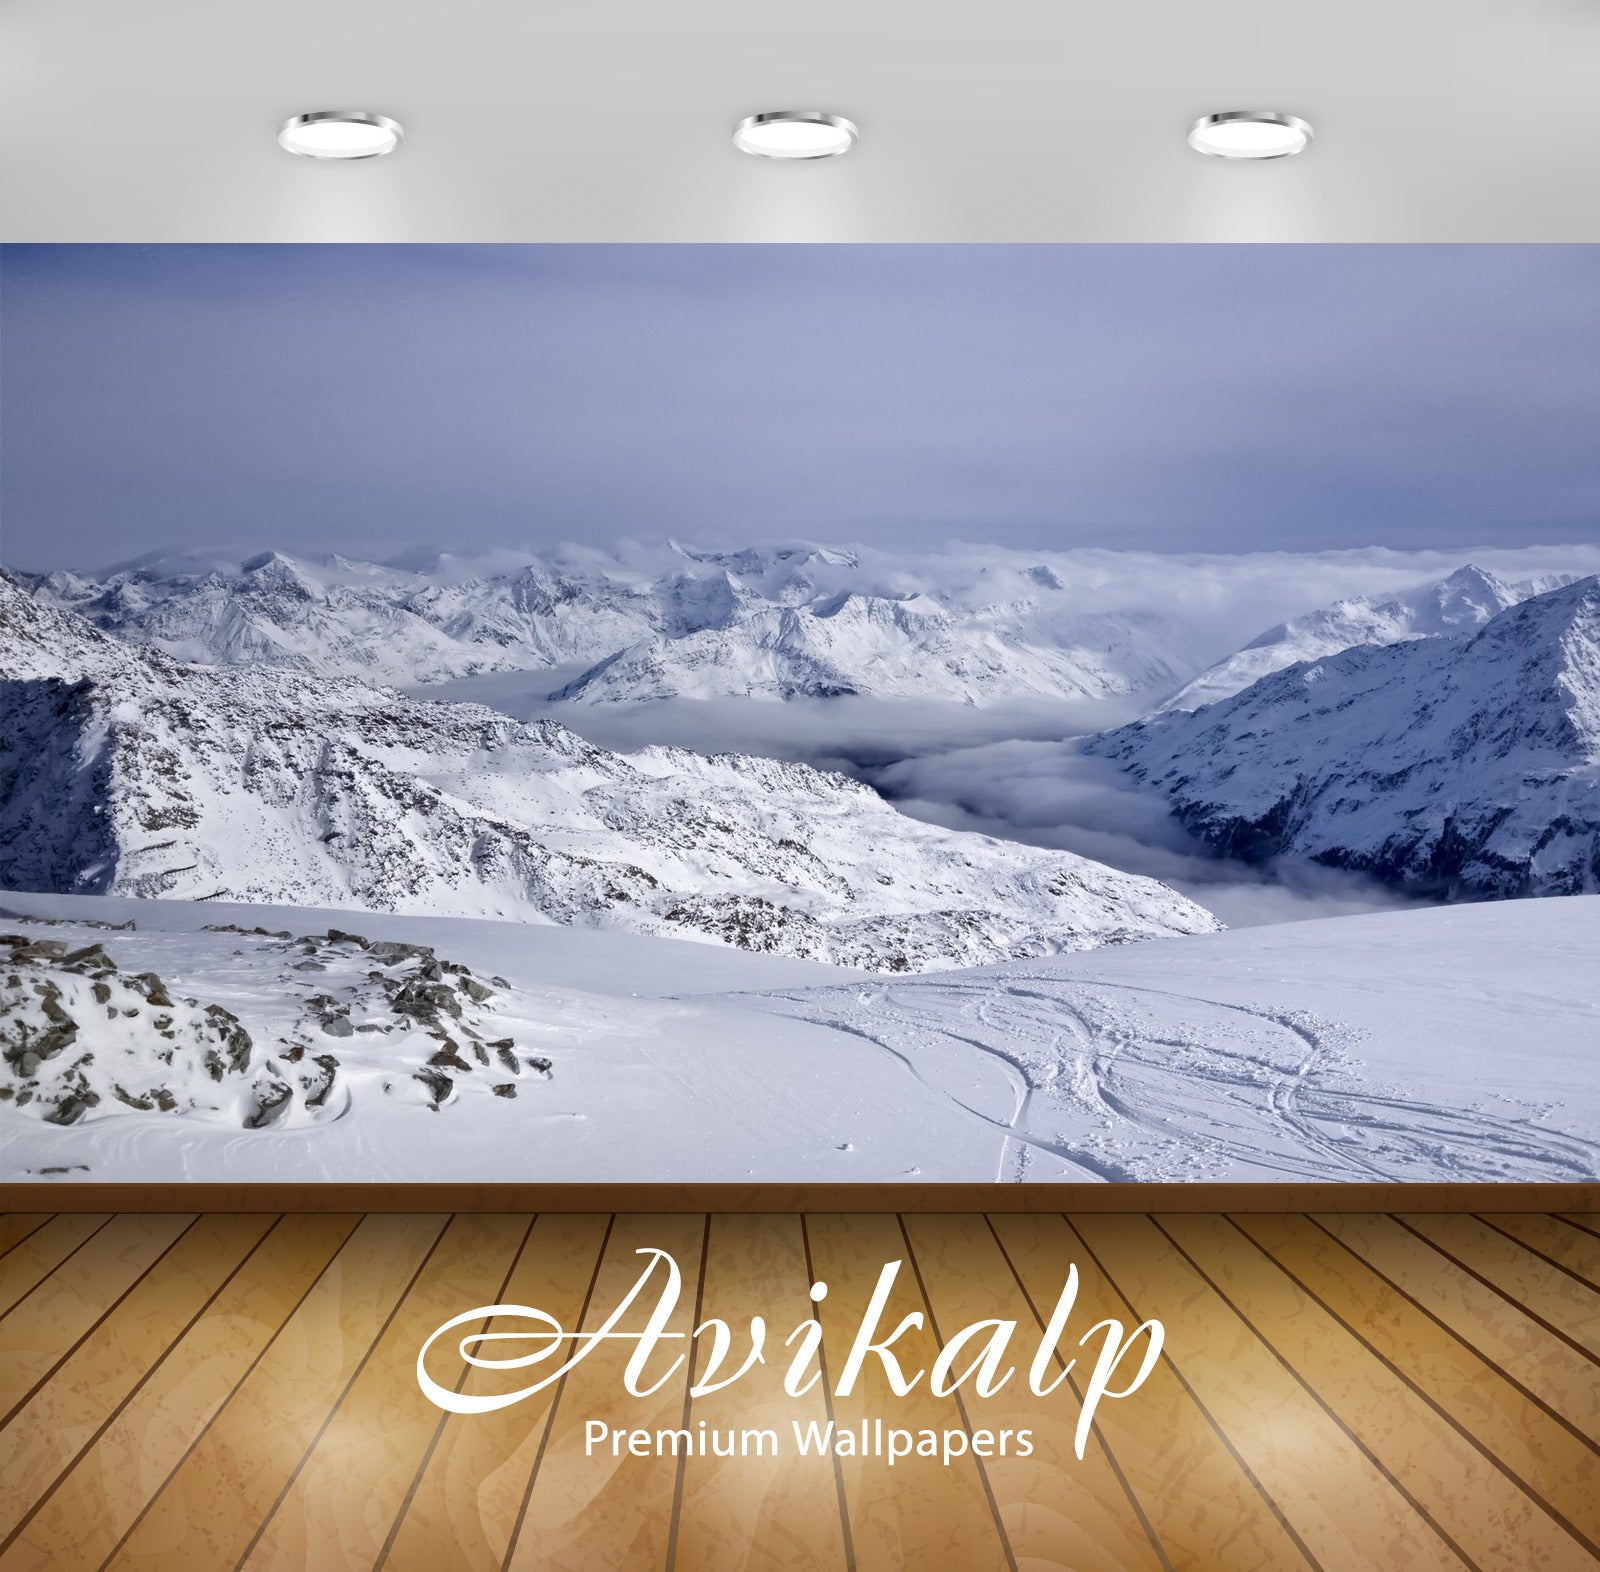 Avikalp Exclusive Ice Land AWI1140 HD Wallpapers for Living room, Hall, Kids Room, Kitchen, TV Backg